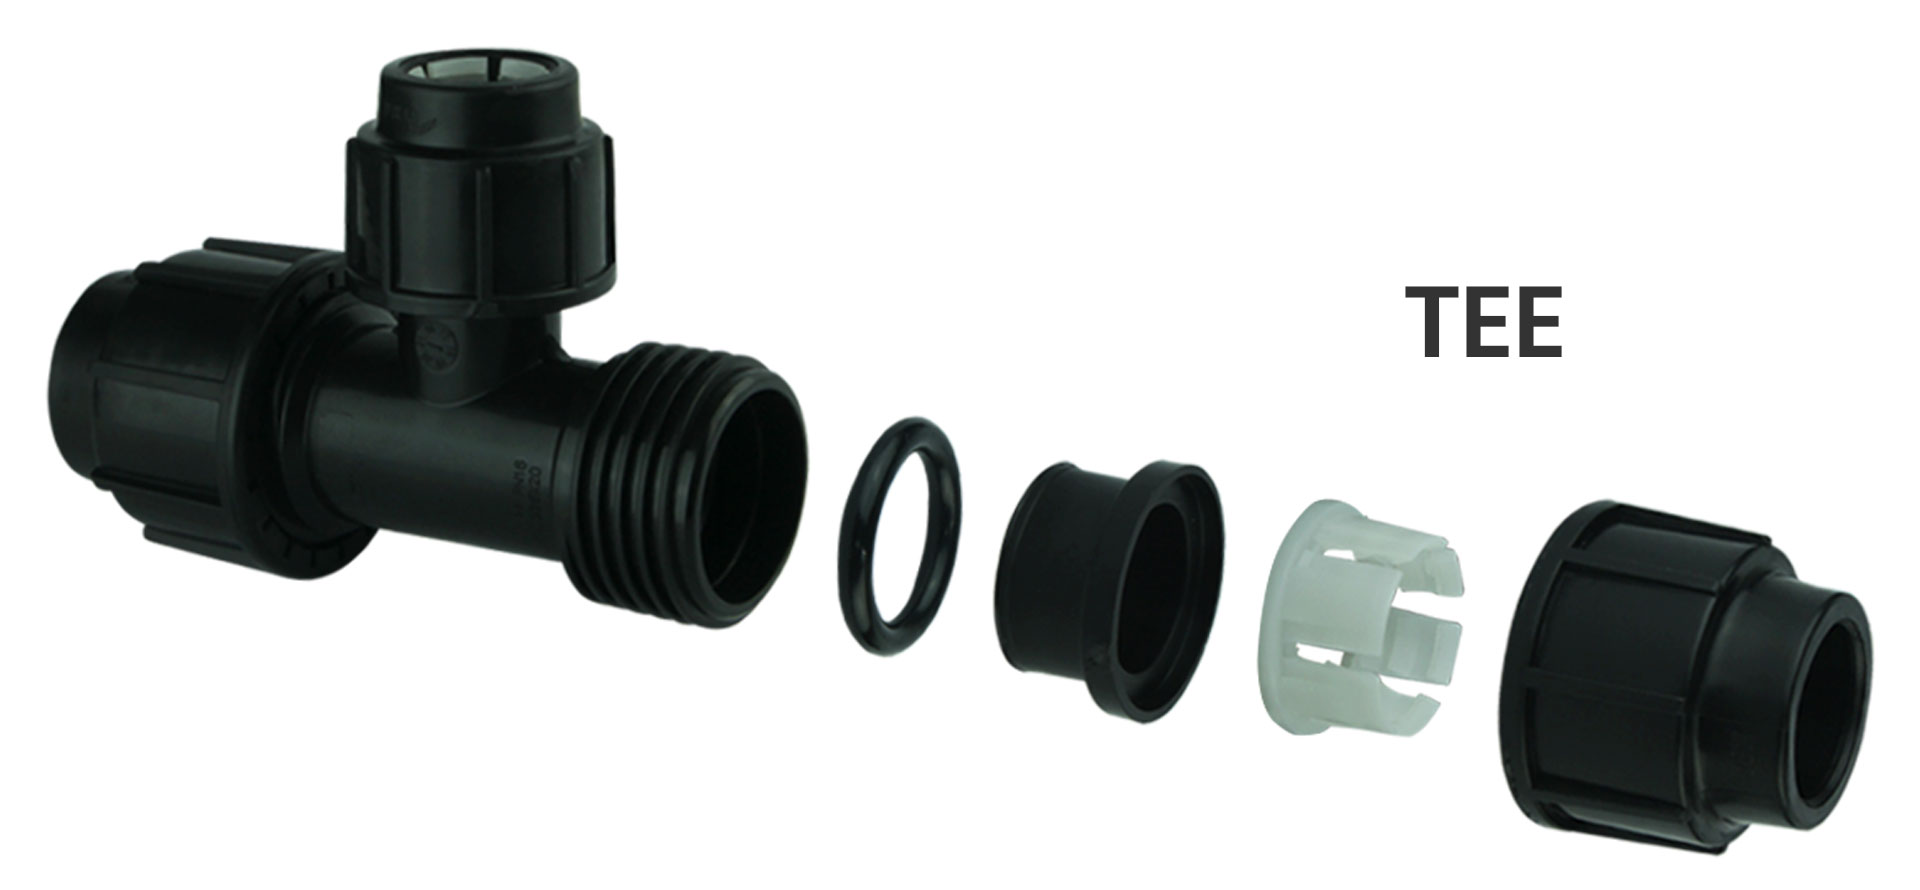 HDPE Pipes Tee Assembly